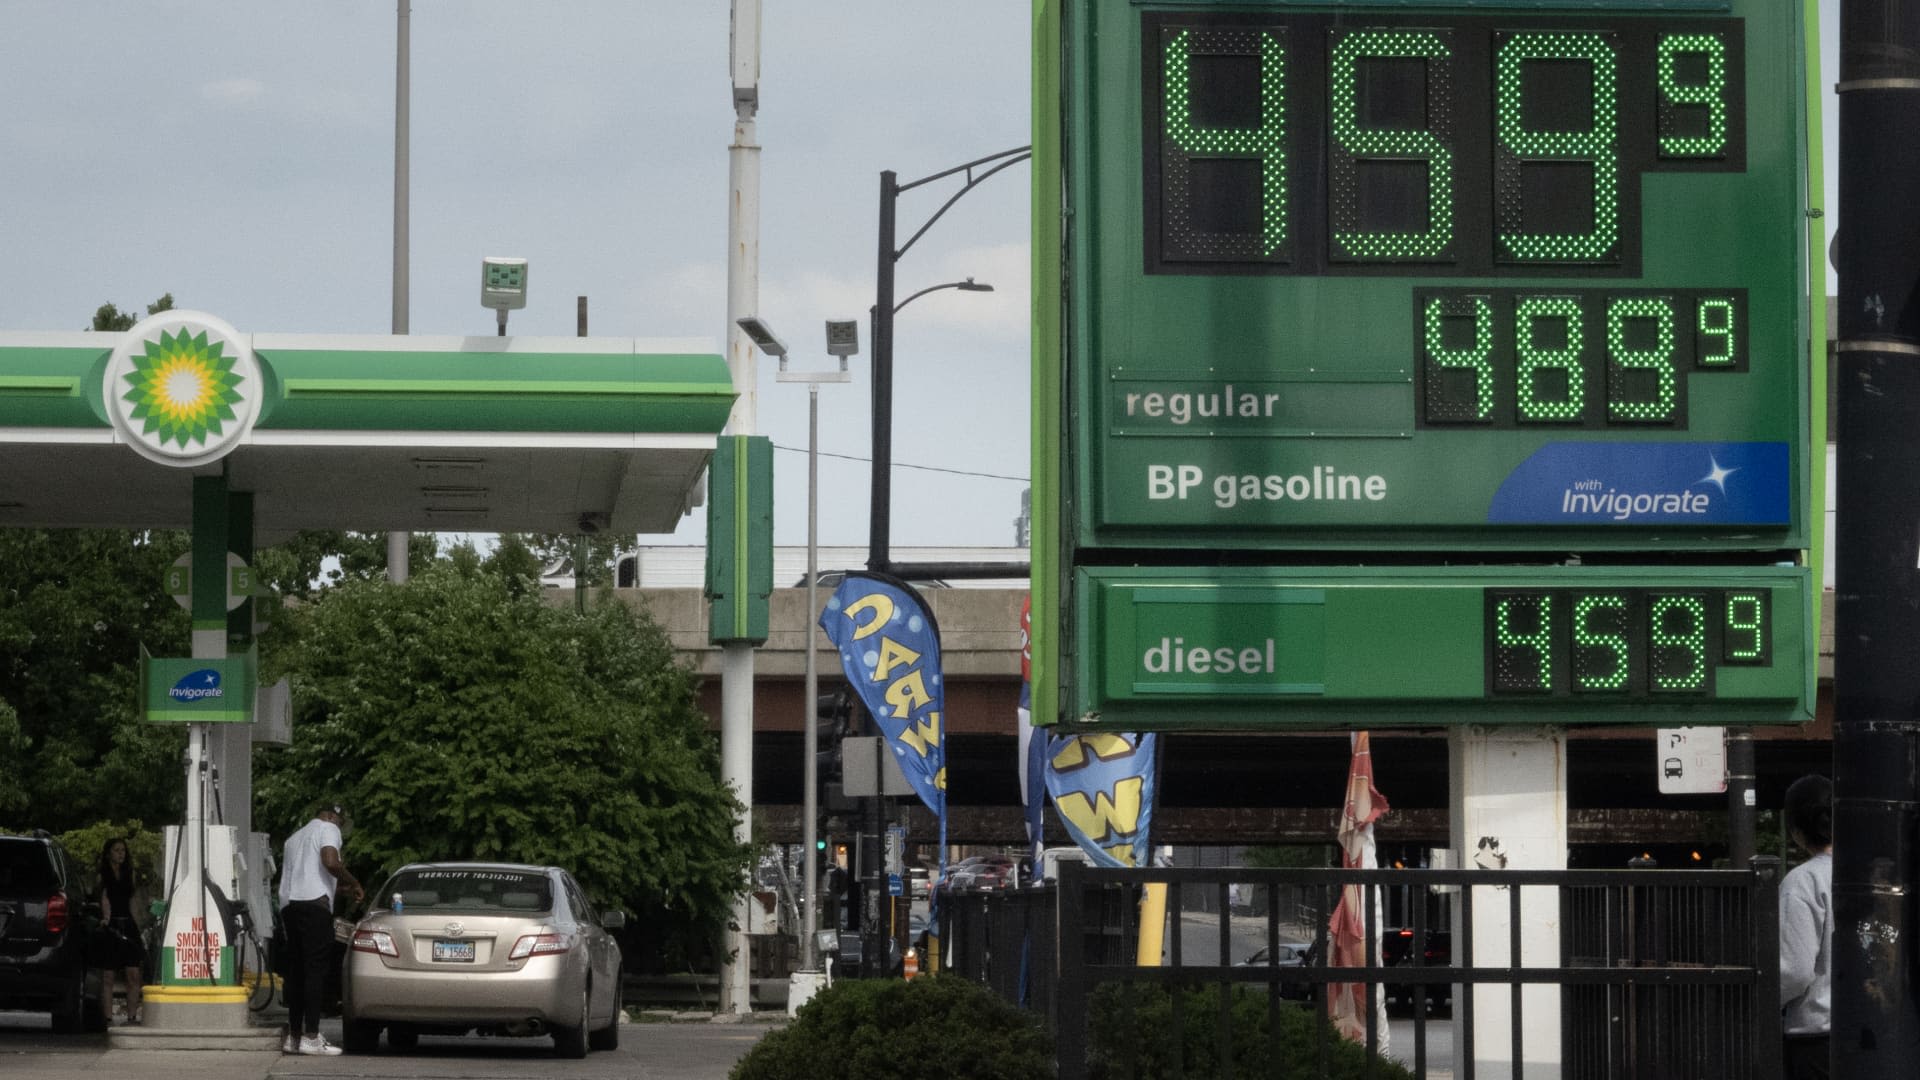 Biden's gasoline sale likely won't have a major impact on summer pump prices